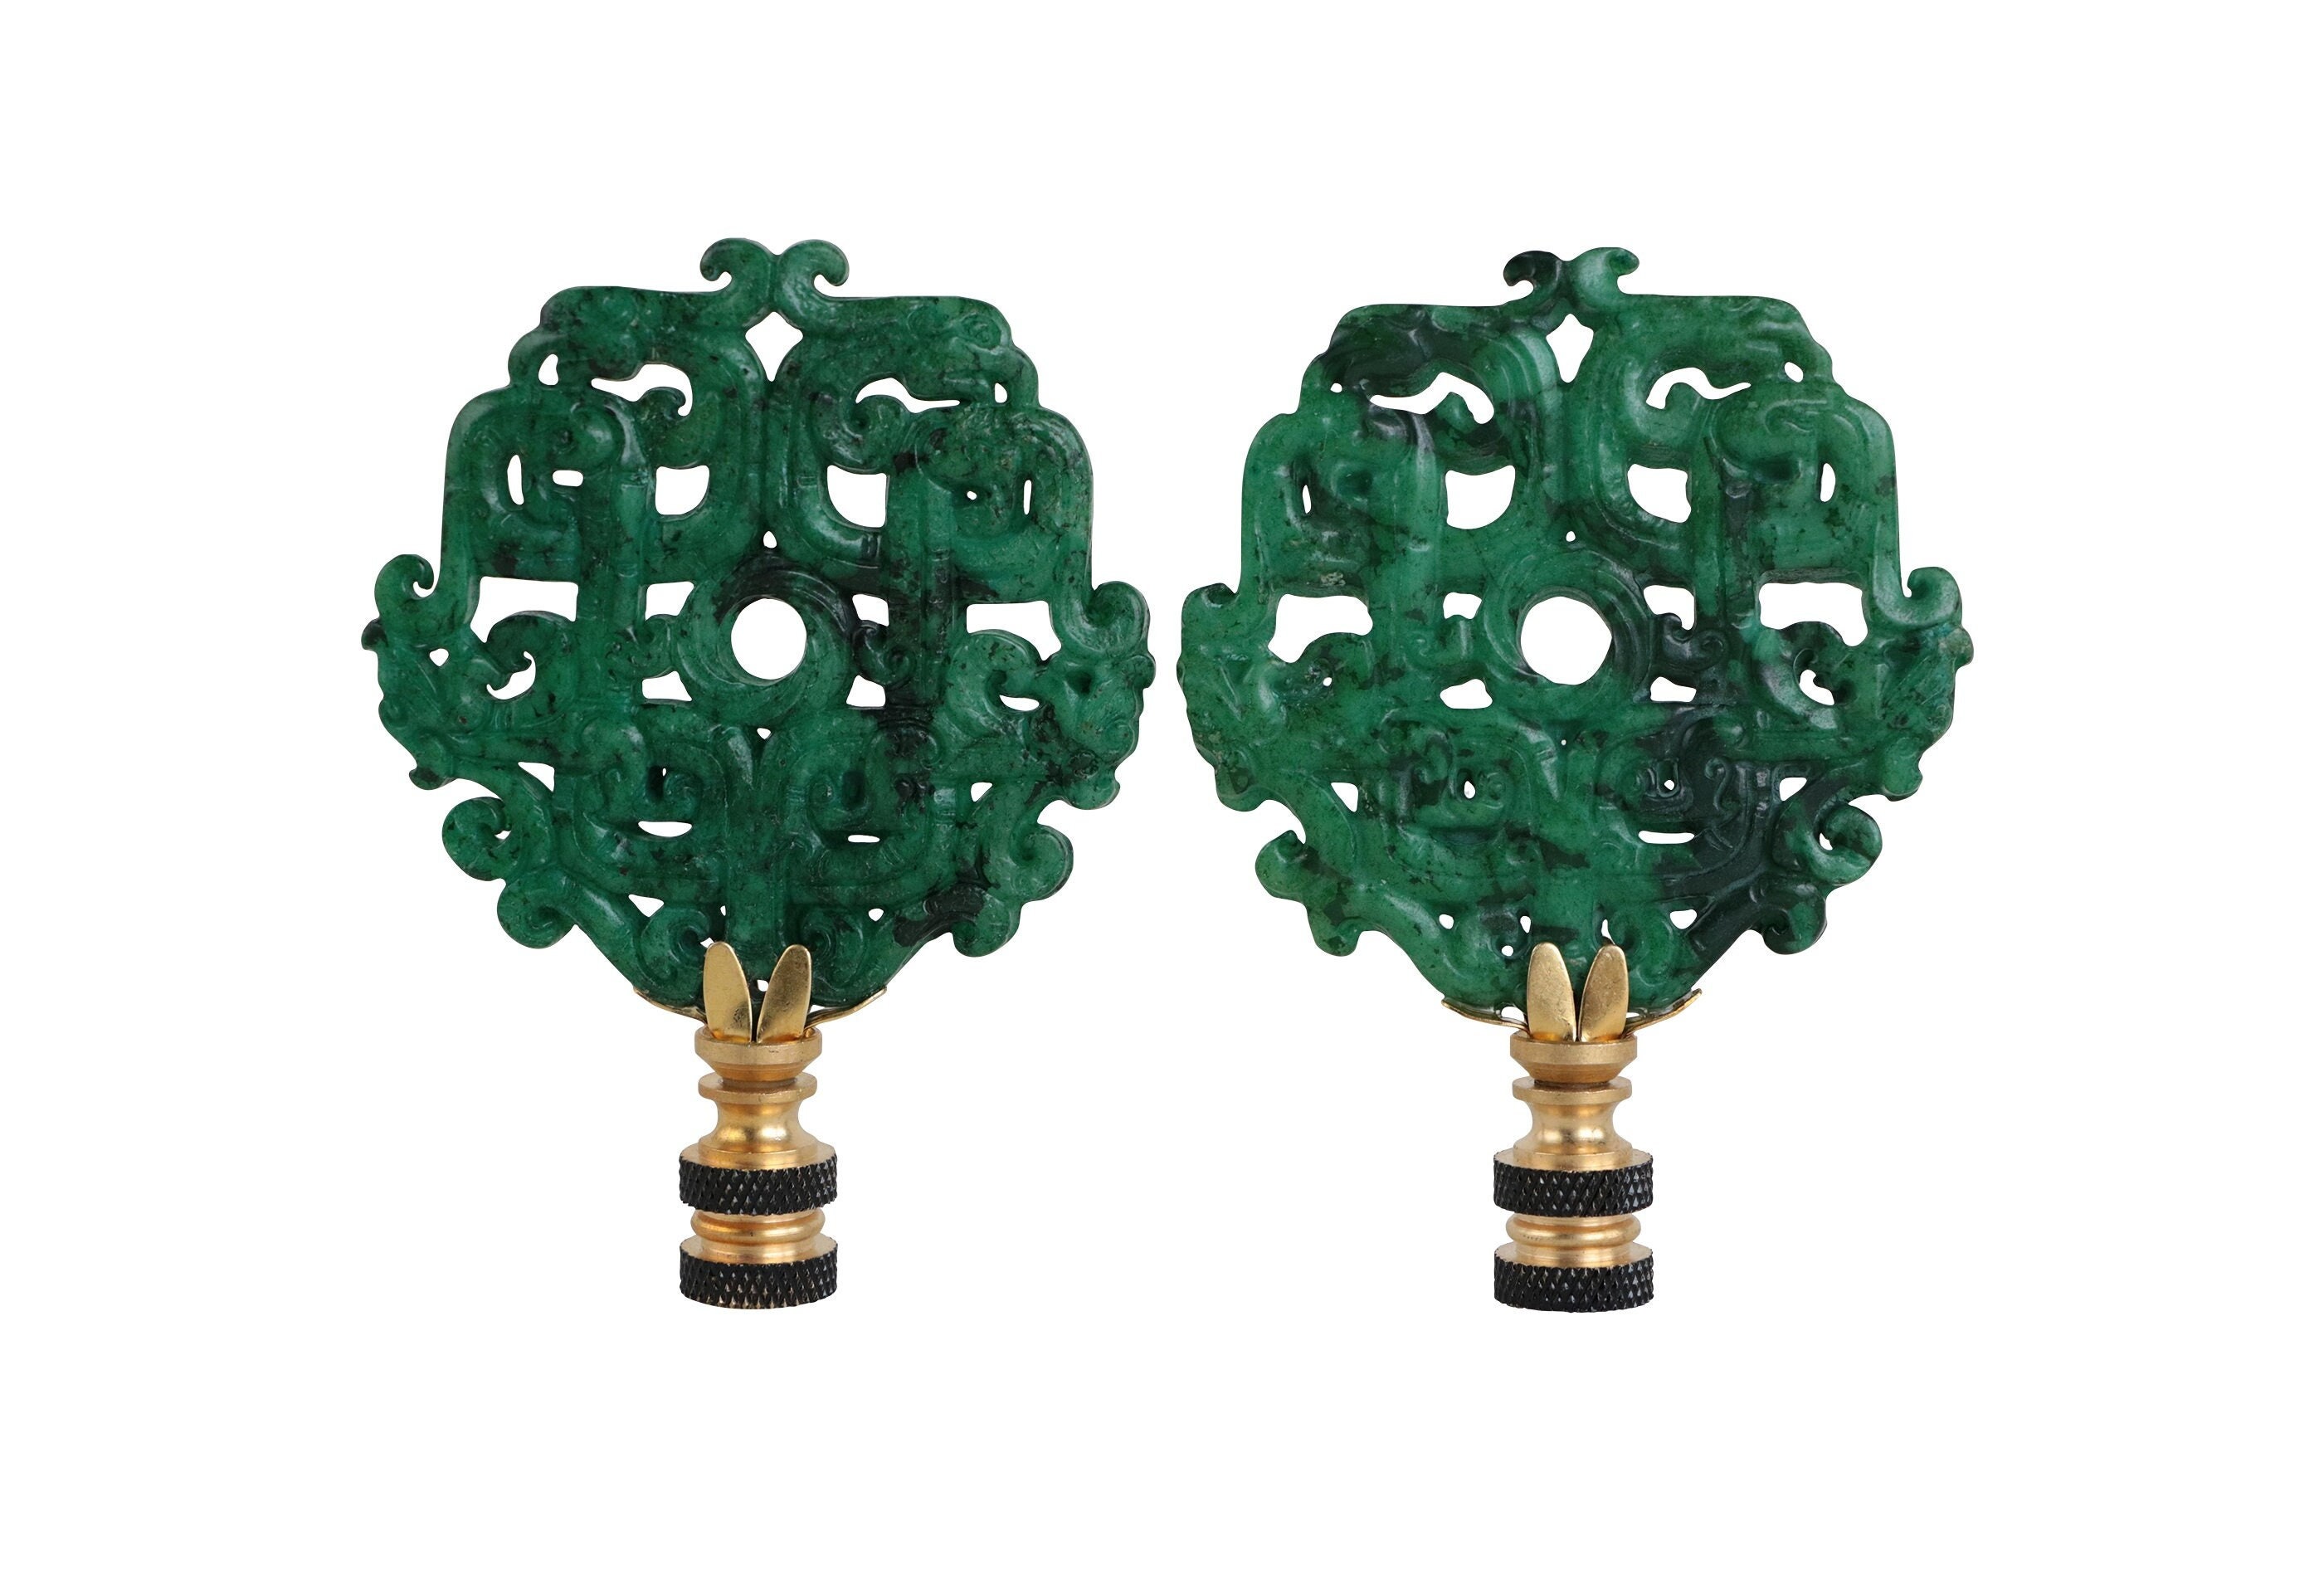 Mottled Jade Green Carved Stone Lamp Finials Asian Lamp Finials on Brass  Hardware A Matching Pair 